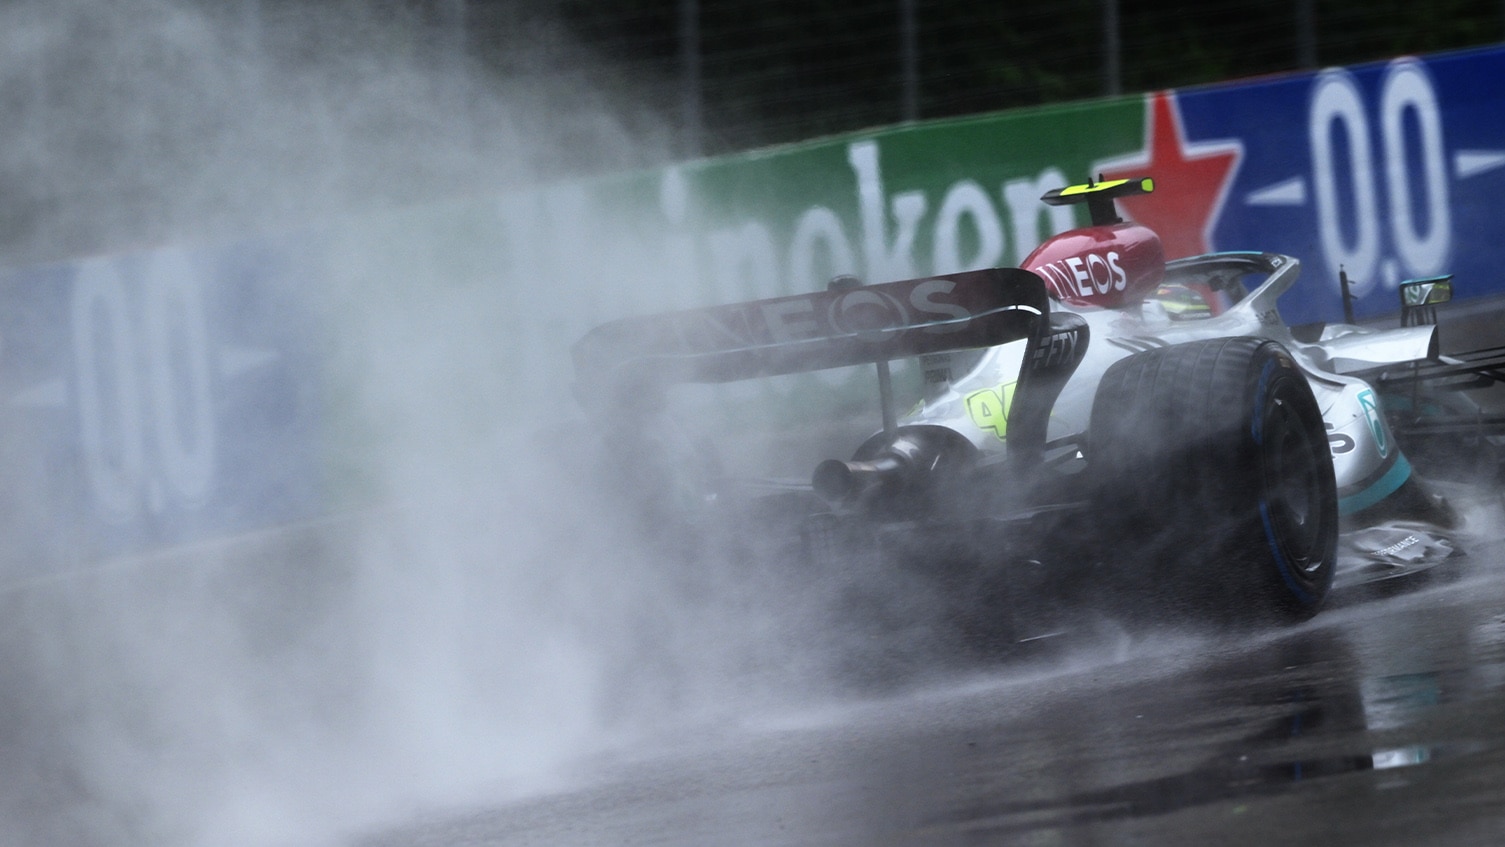 Spray kicked up by the Mercedes of Lewis Hamilton in qualifying for the 2022 Canadian Grand Prix